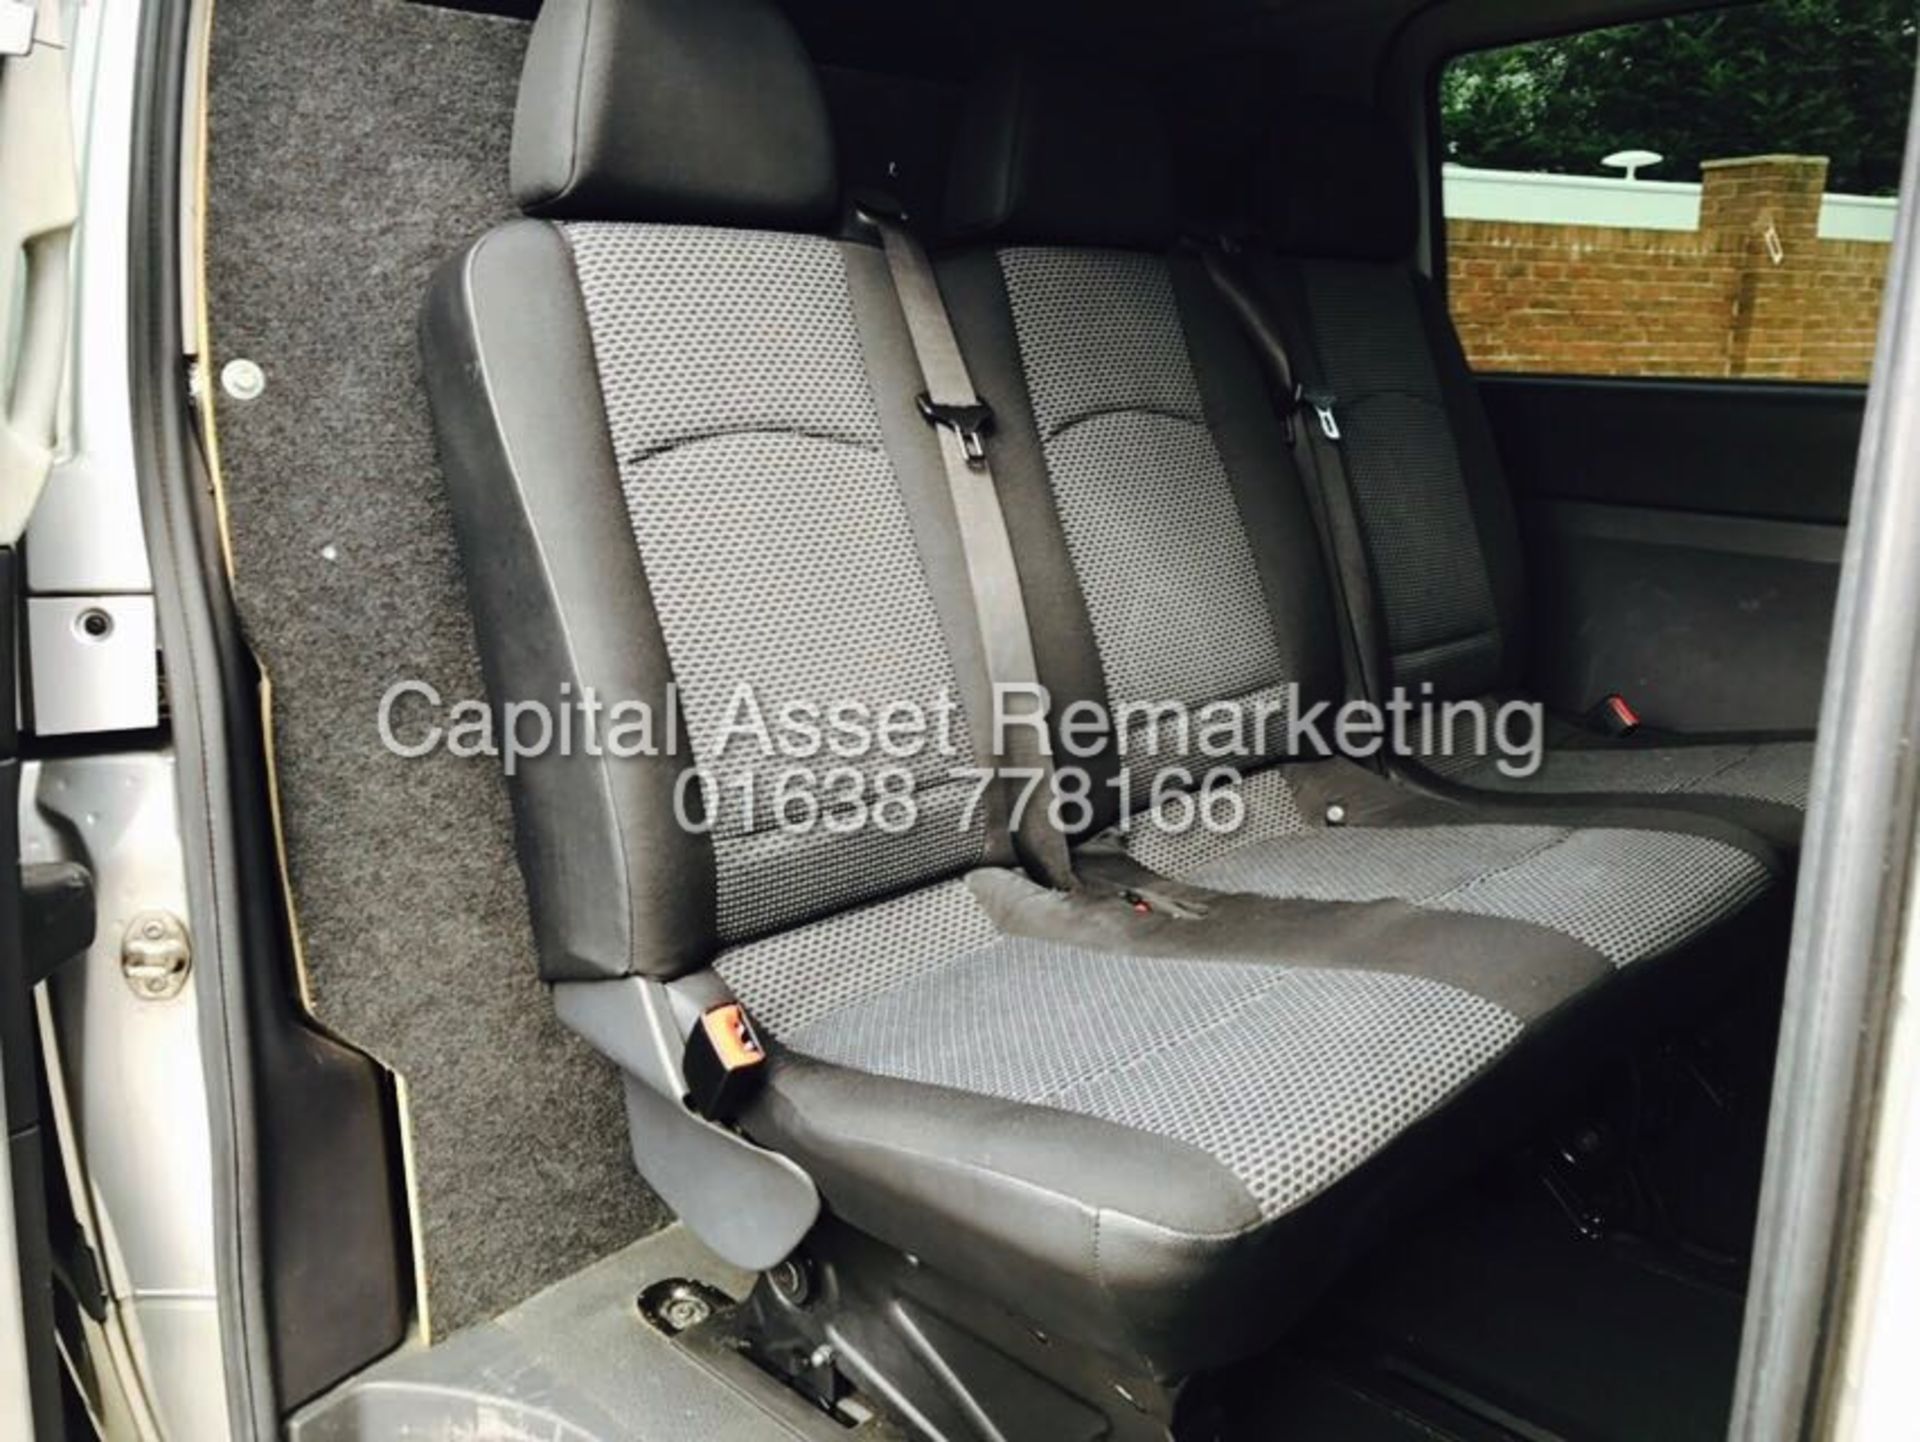 (ON SALE) MERCEDES VITO 113CDI DUELINER / COMBI SPORTY VAN -5 SEATER-60 REG- NEW SHAPE- AIR CON - Image 11 of 24